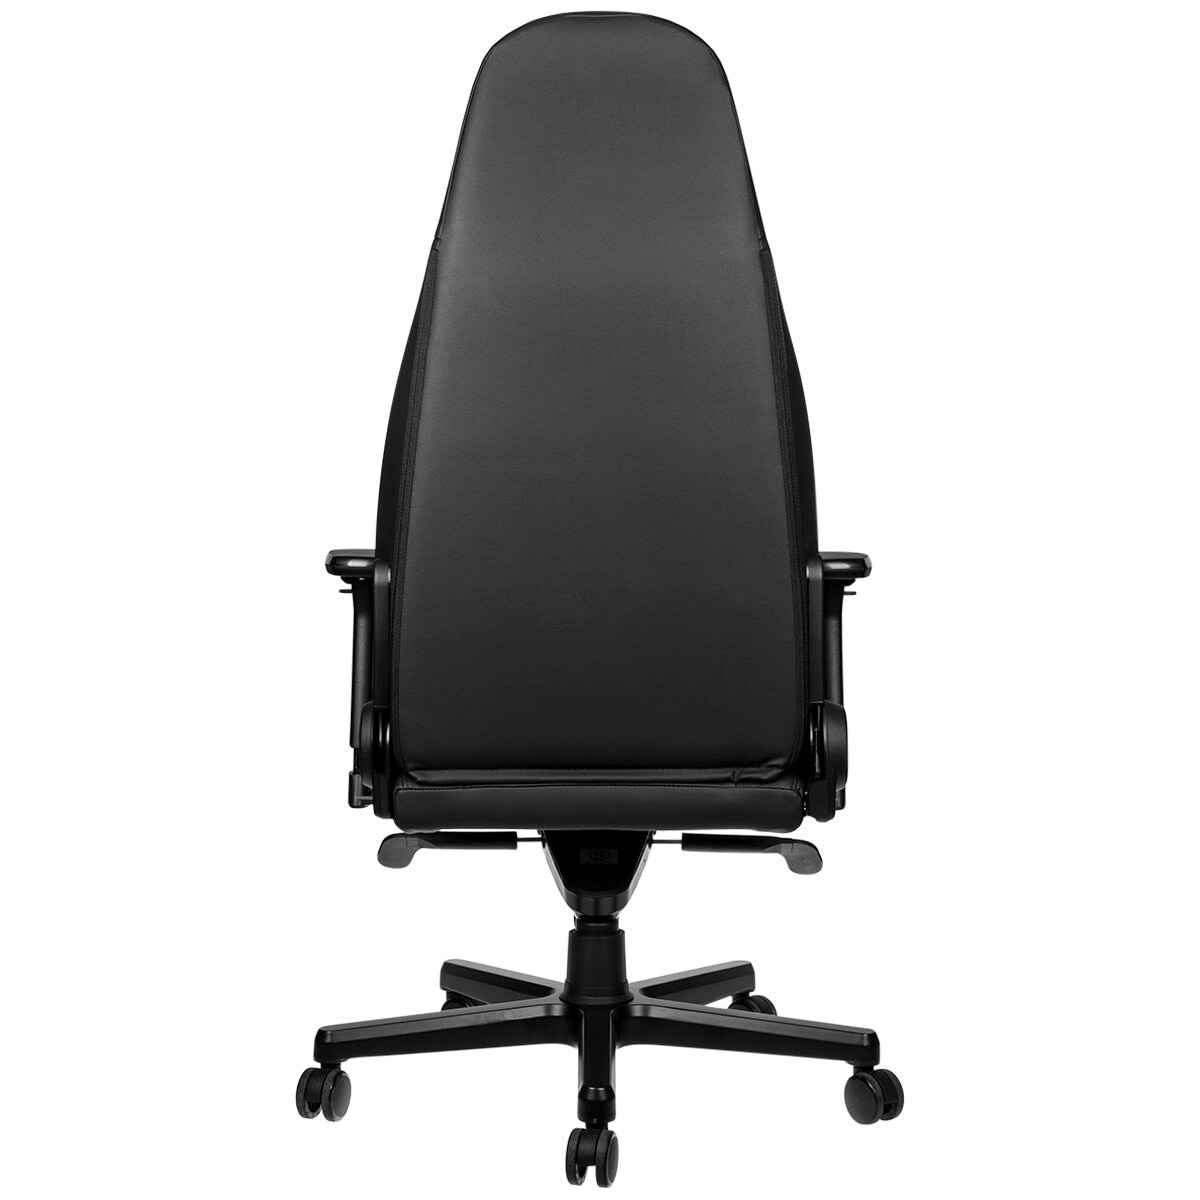 Noblechairs ICON Gaming Chair - Black Edition